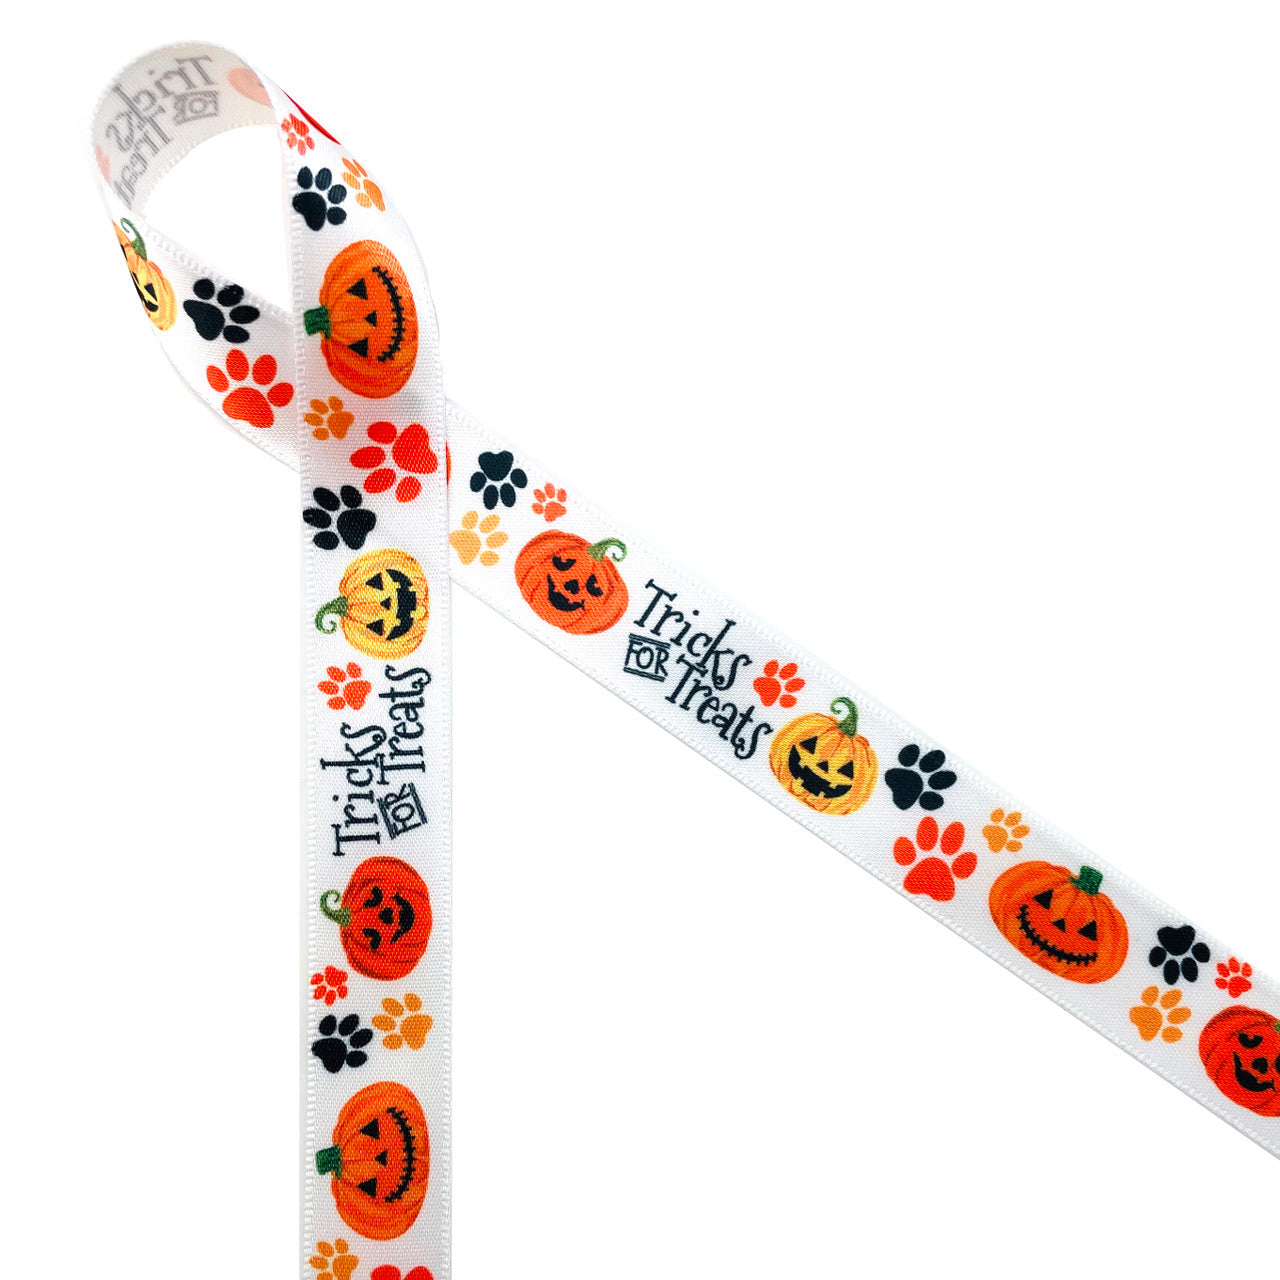 Tricks for Treats mixed with paw prints and Jack O' Lanterns is the ideal ribbon for making Fido feel special this Halloween! Printed on 5/8" white single face satin, this ribbon is available in 10 yard spools!